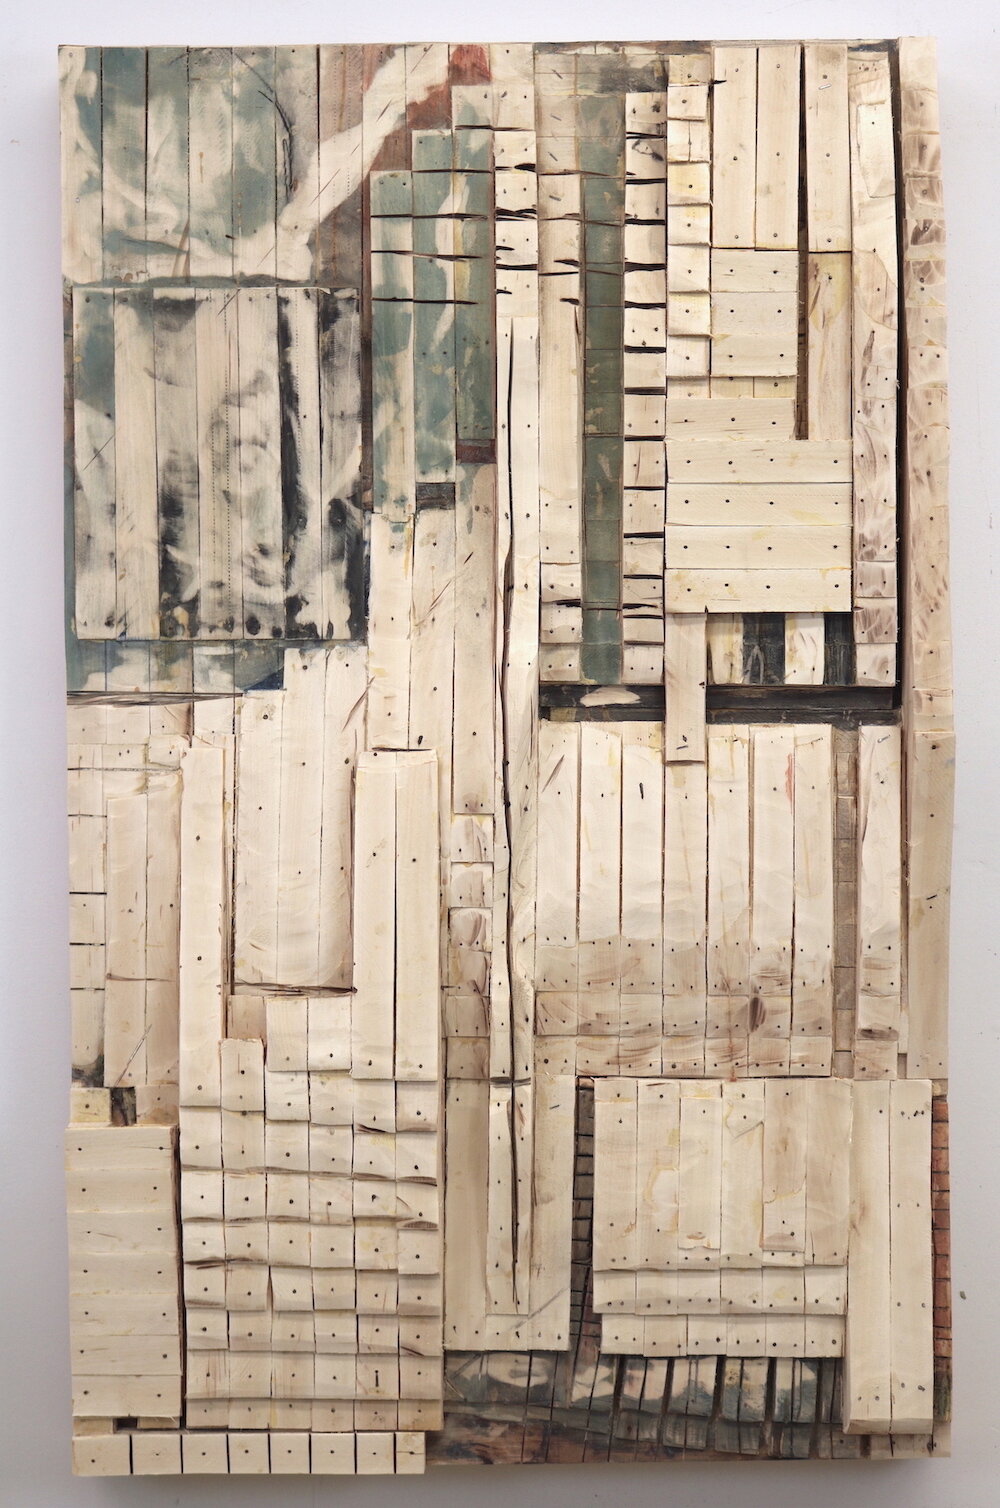    Dwelling Revisited 2   paint, wood shims, nails on panel, 48” x 30” x 4.75” 